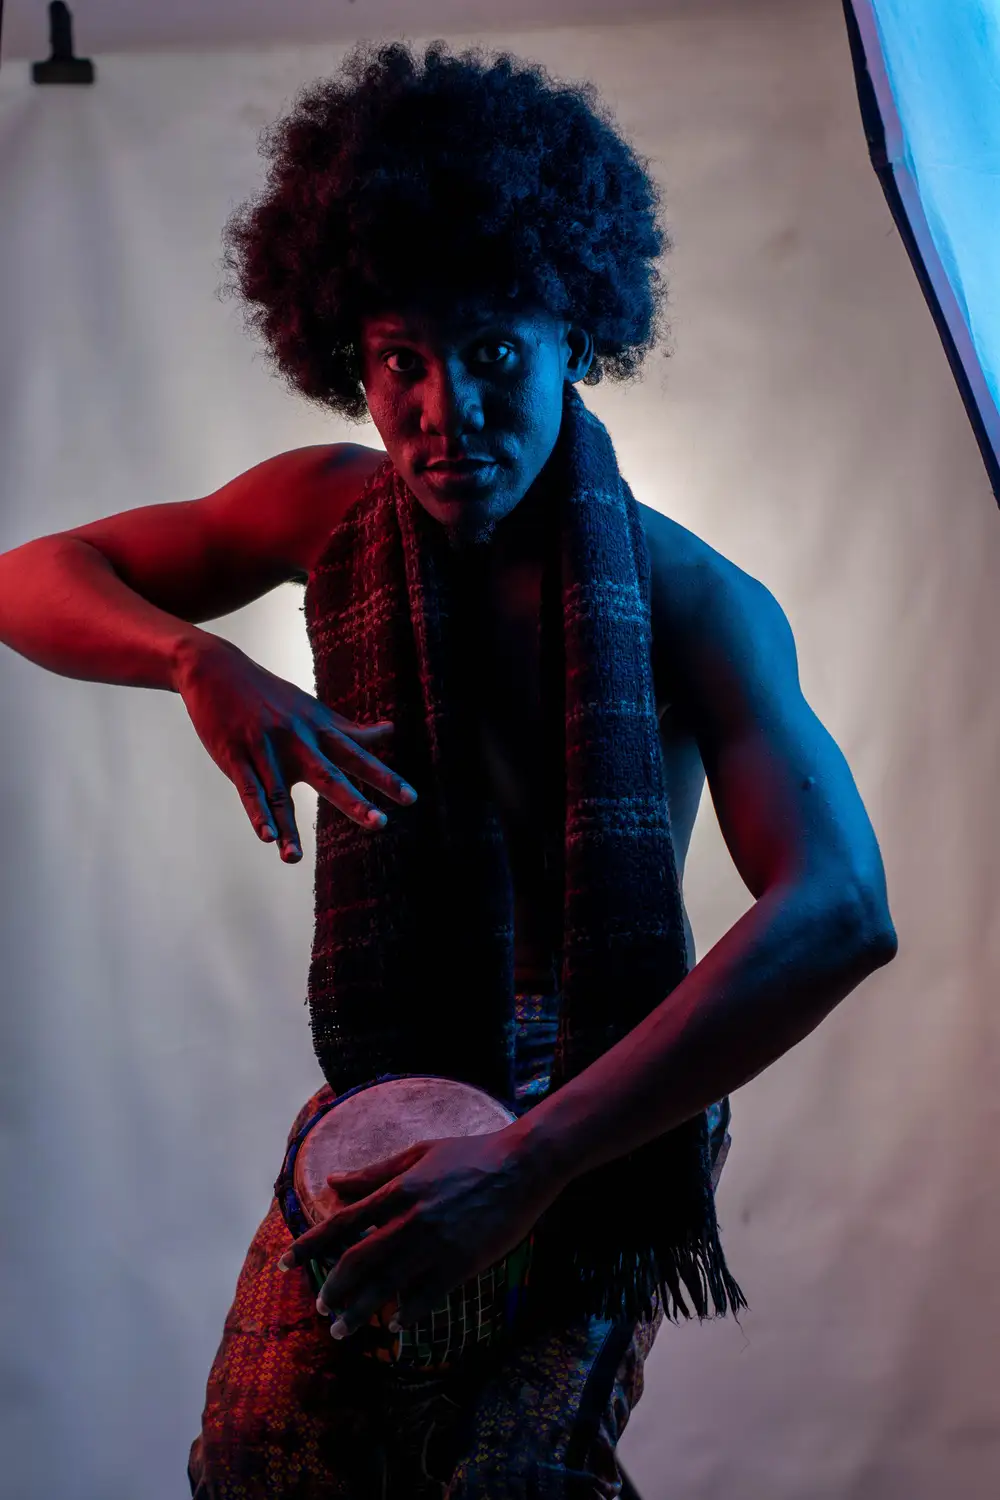 model on afro hairstyle plays drum